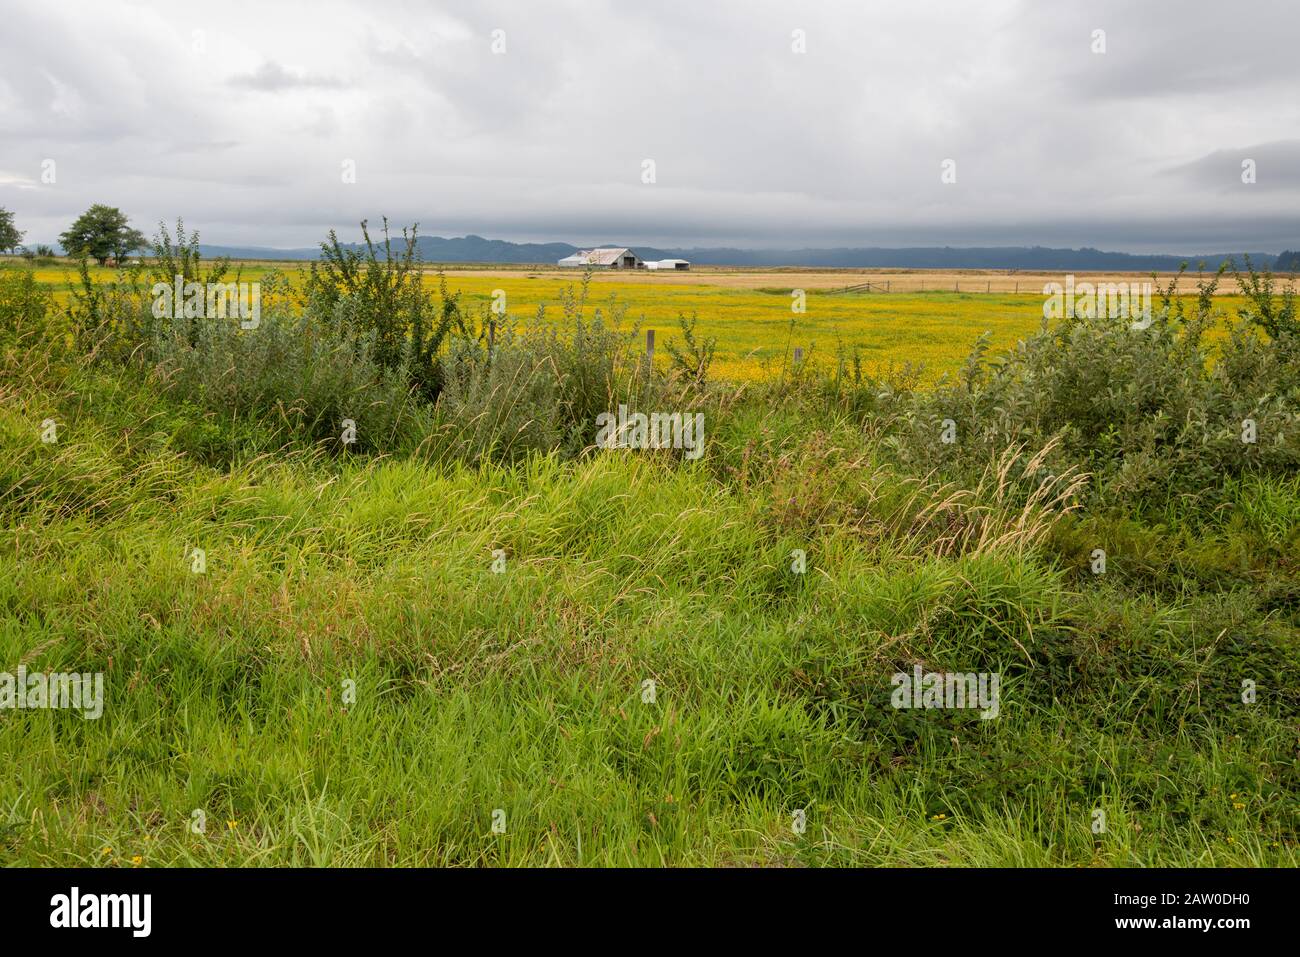 A Pacific Northwest farm is socked in by summer storm clouds. Stock Photo